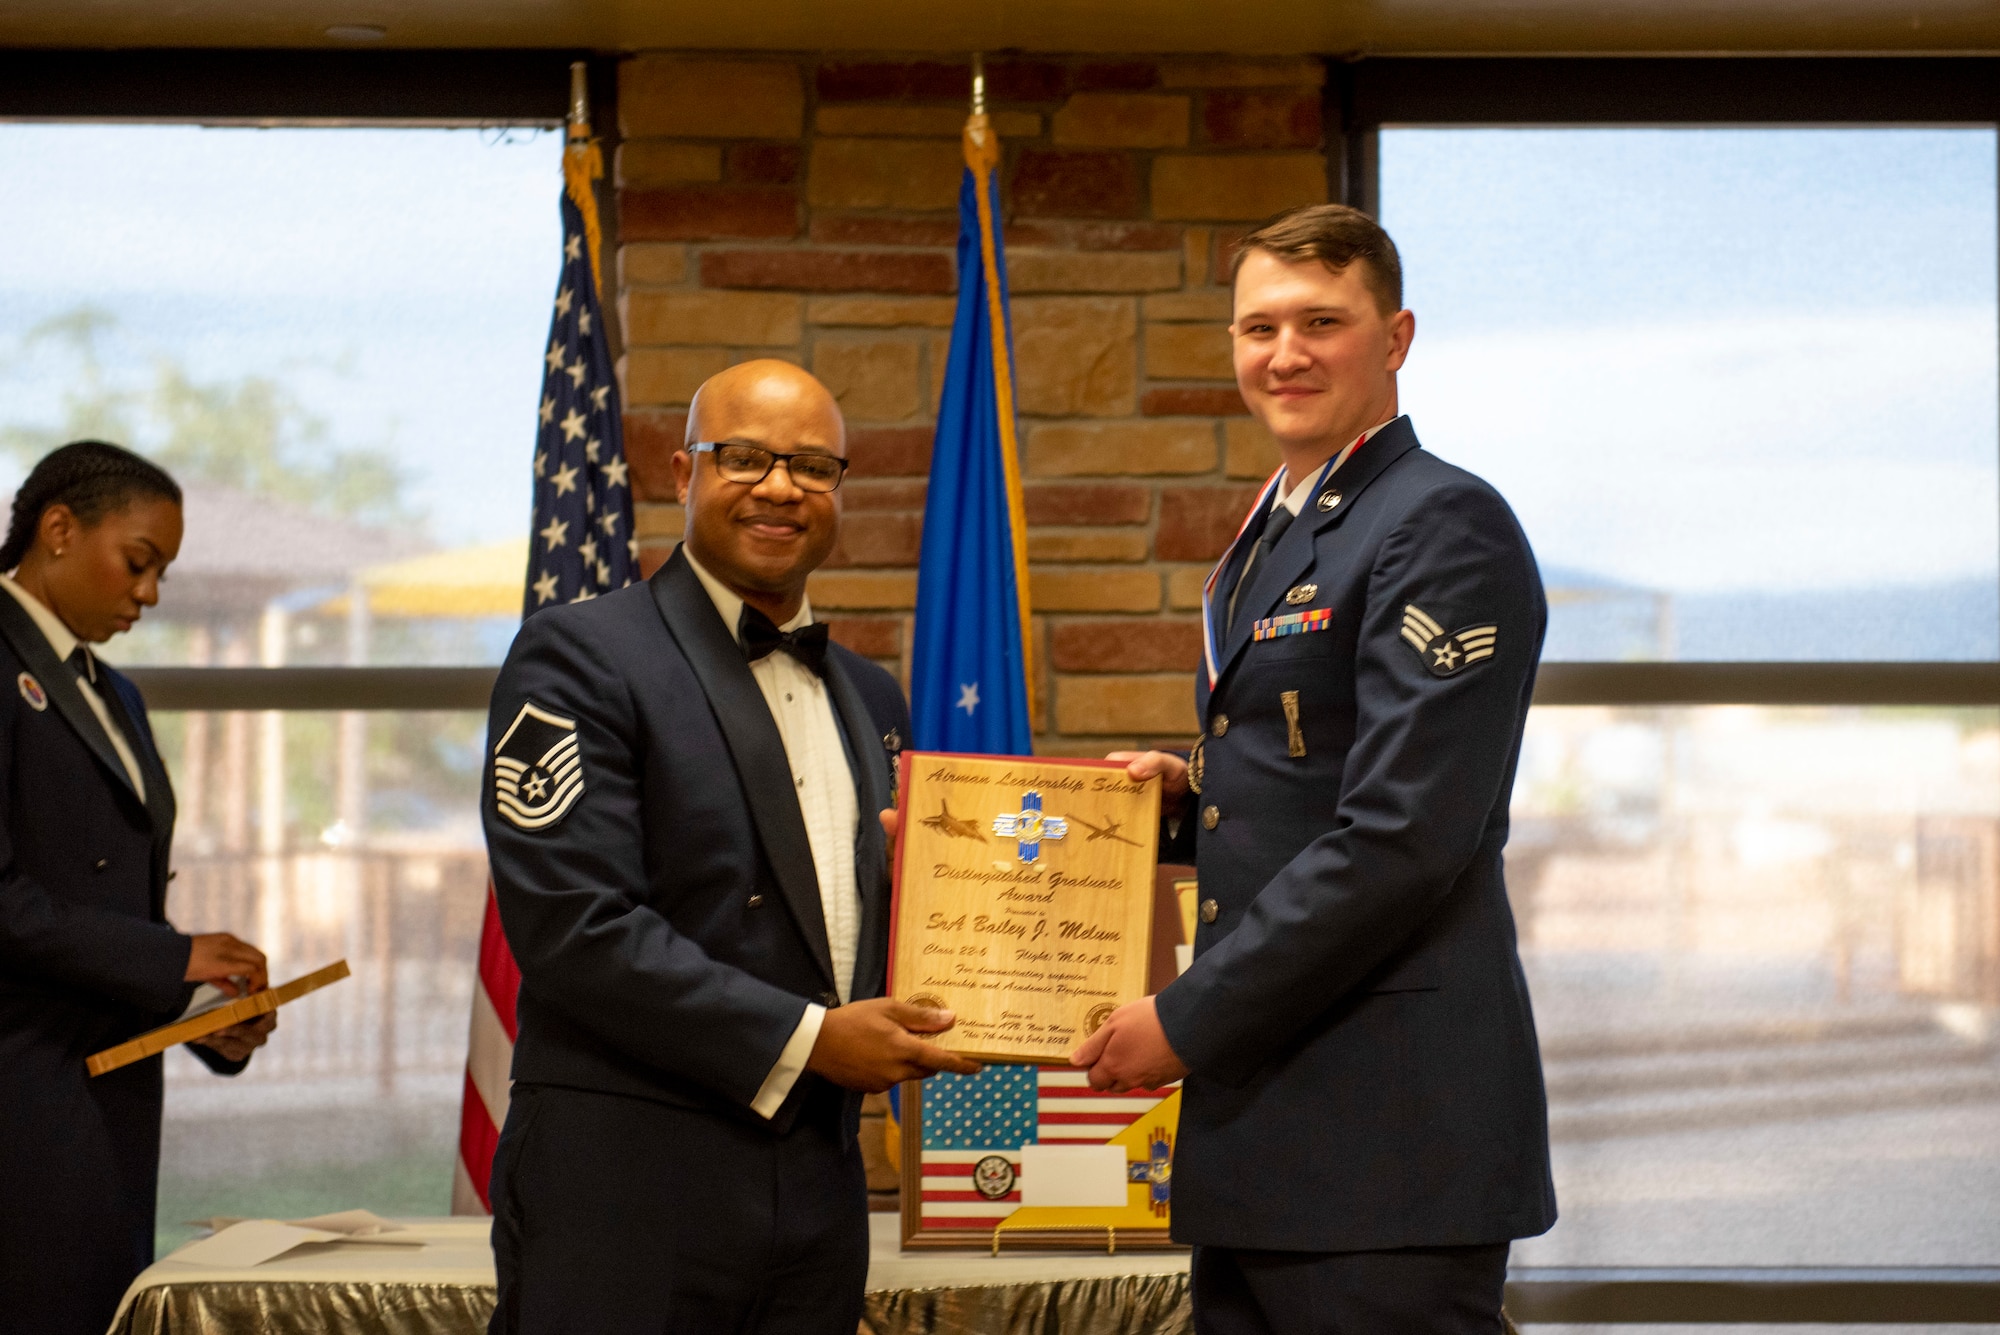 Senior Airman Bailey J. Melum, Airman Leadership School graduate, accepts the Distinguished Graduate Award from Master Sgt. Troy Campbell, Holloman Top III representative during the graduation of ALS class 22-6, July 7, 2022, on Holloman Air Force Base, New Mexico.